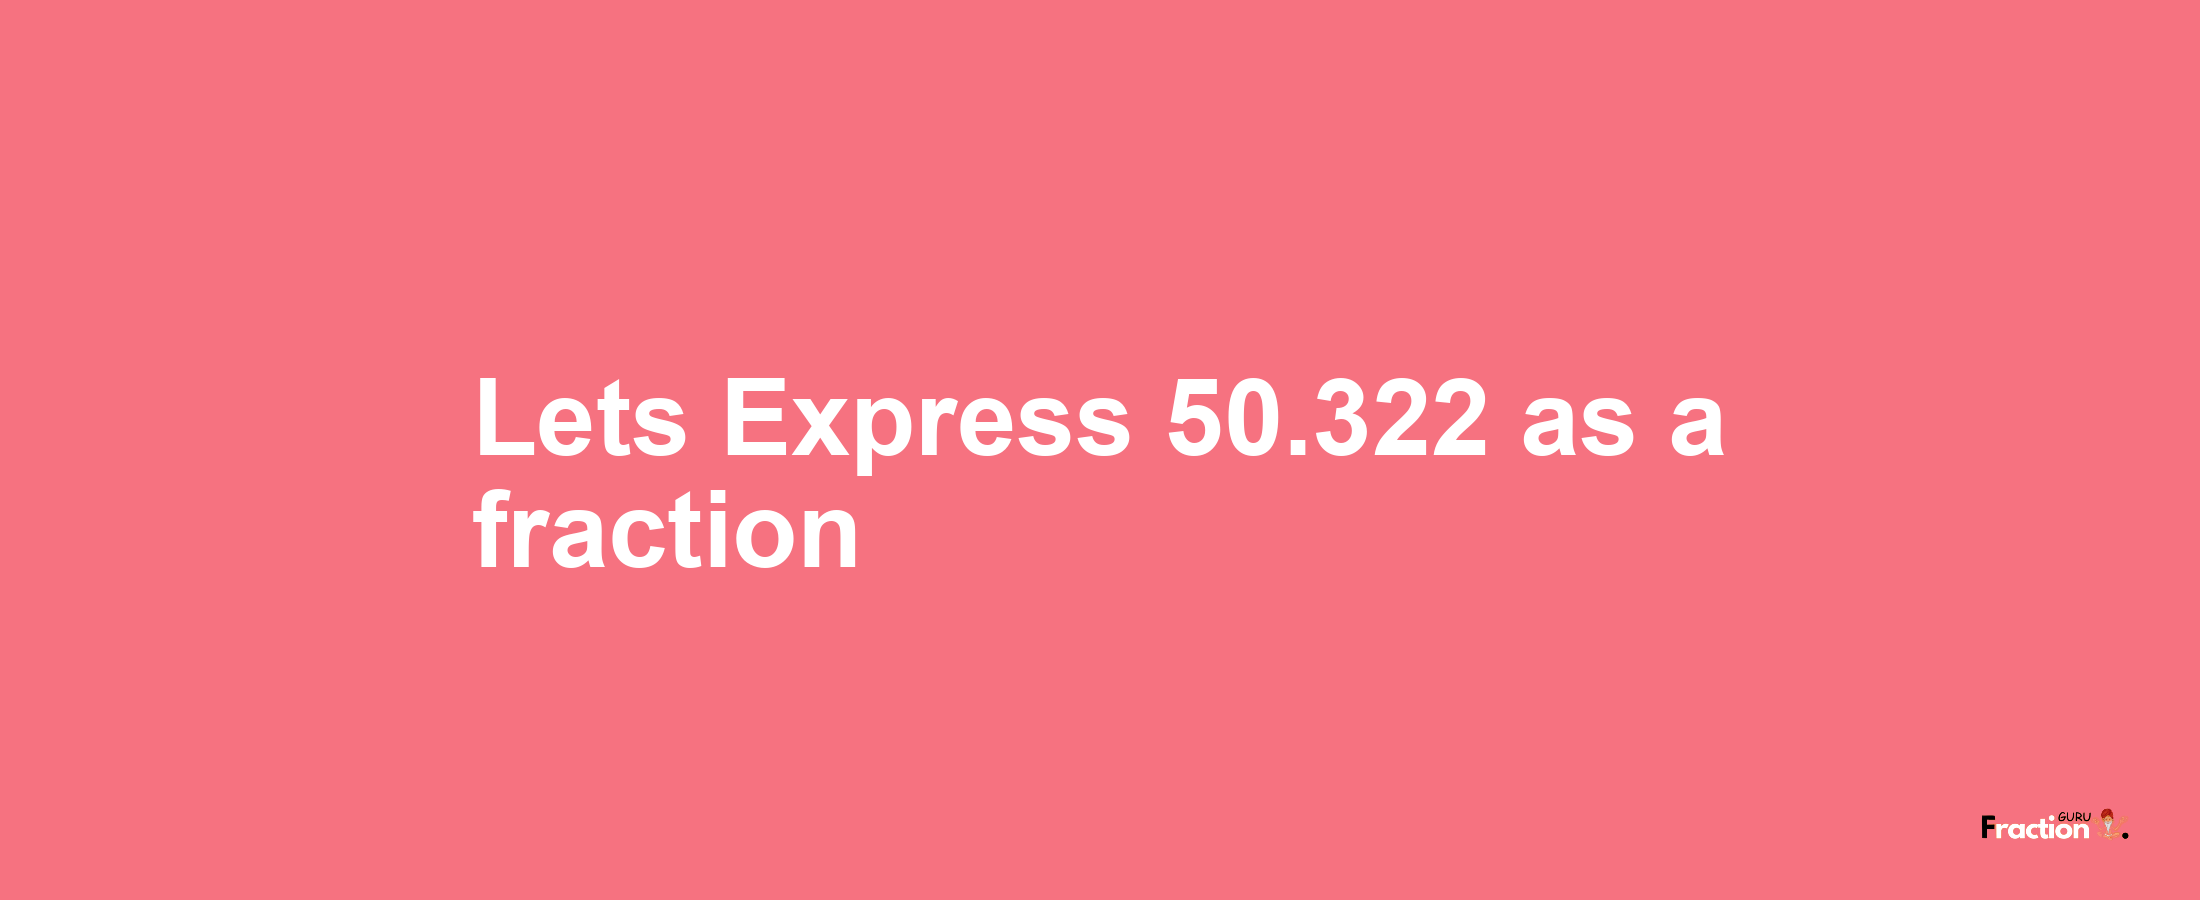 Lets Express 50.322 as afraction